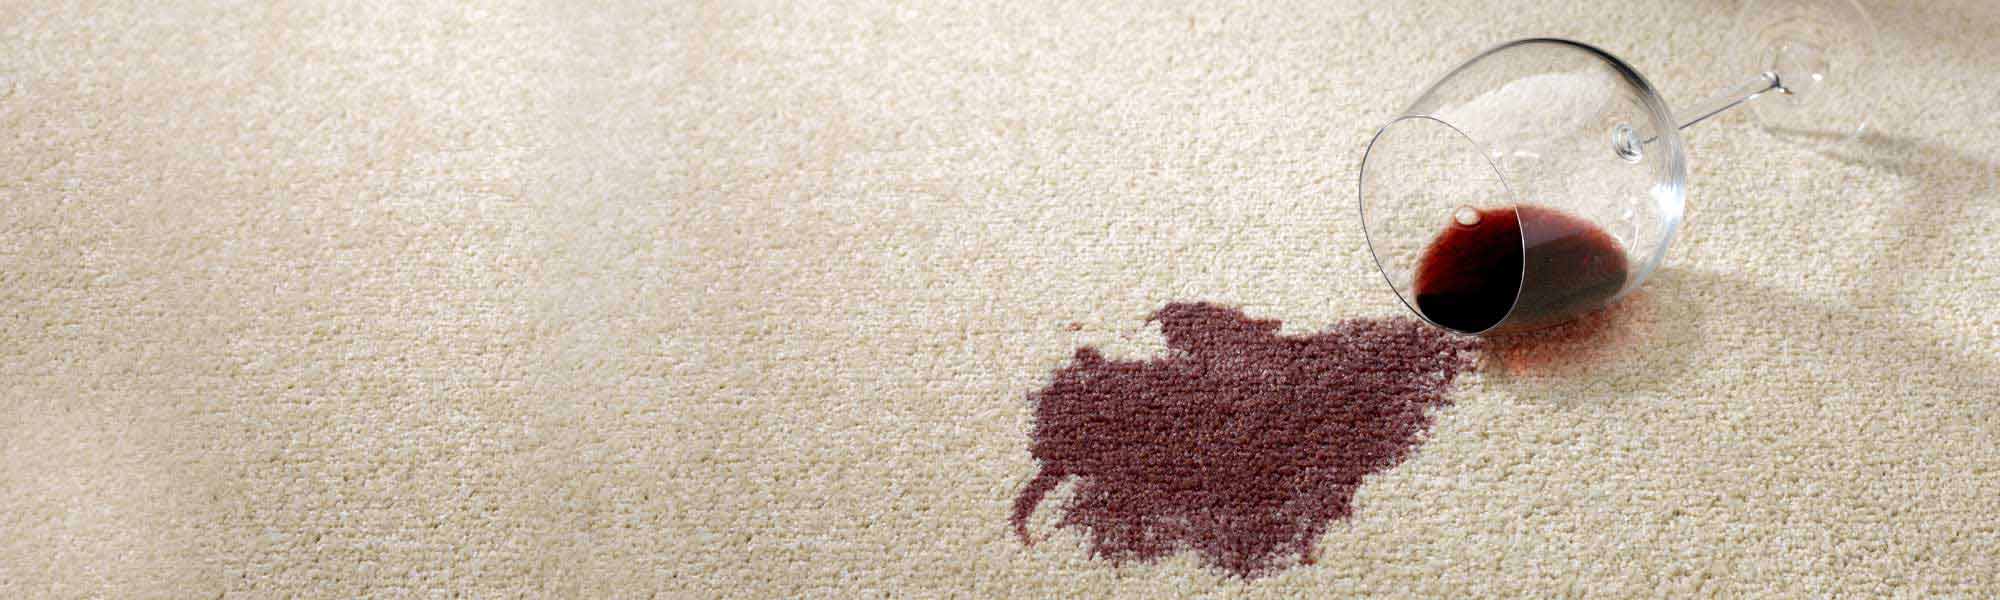 Professional Stain Removal Services by Lake Chem-Dry can tackle any specialty stain, from ink to wine, nail polish and more!